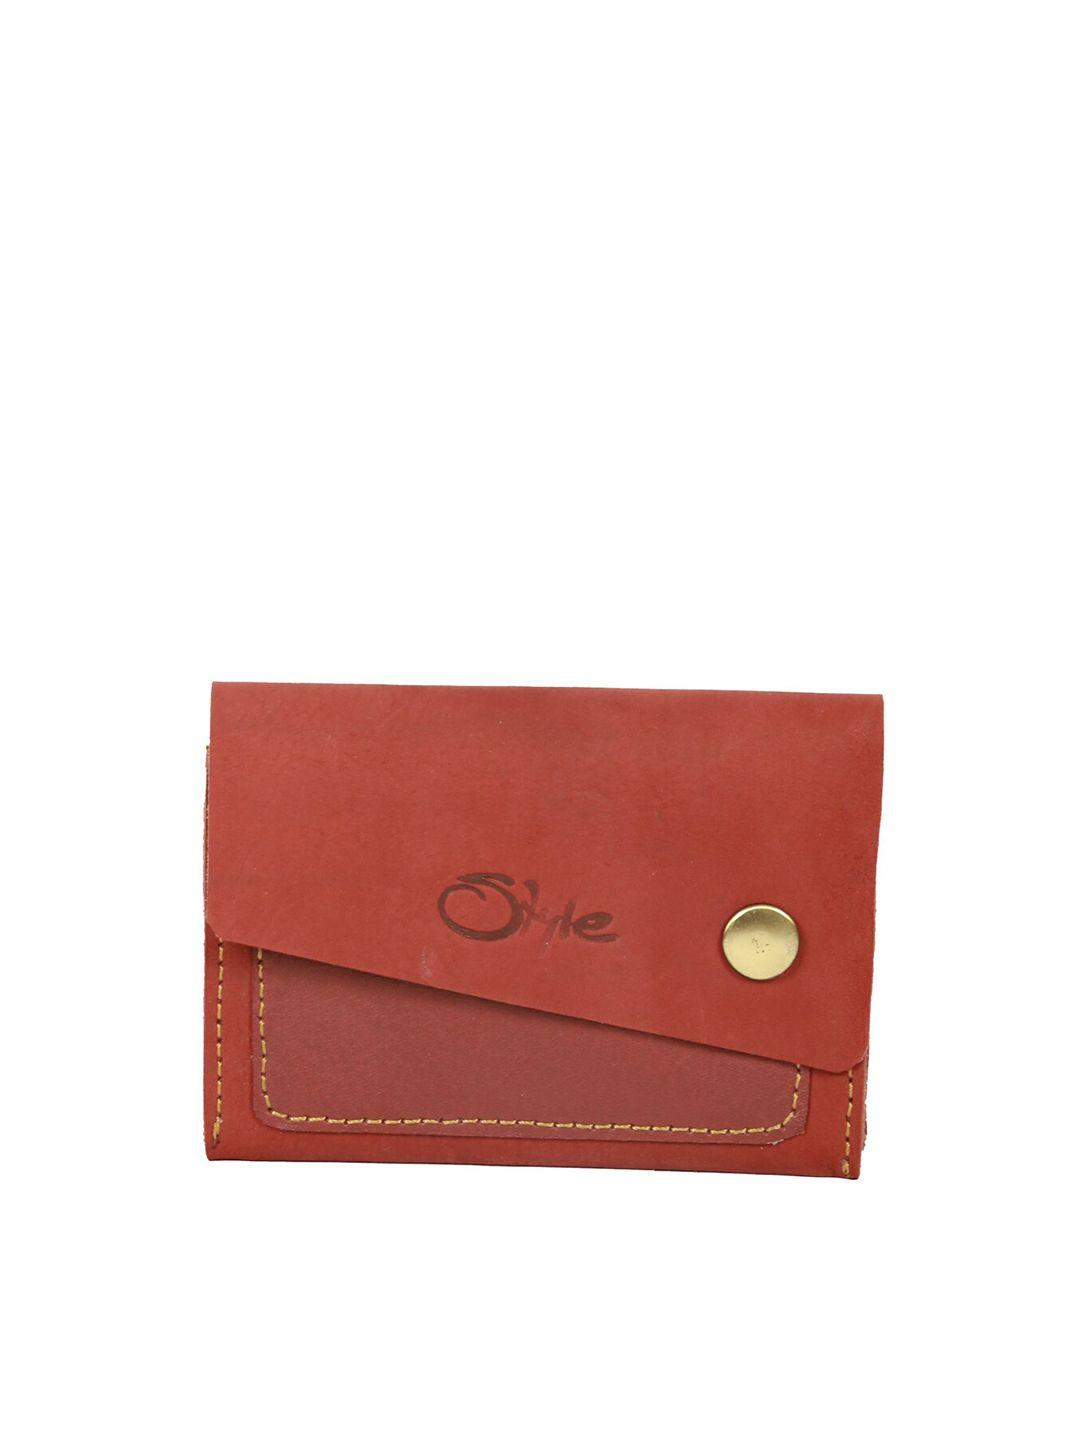 style shoes rfid blocking leather credit card holder